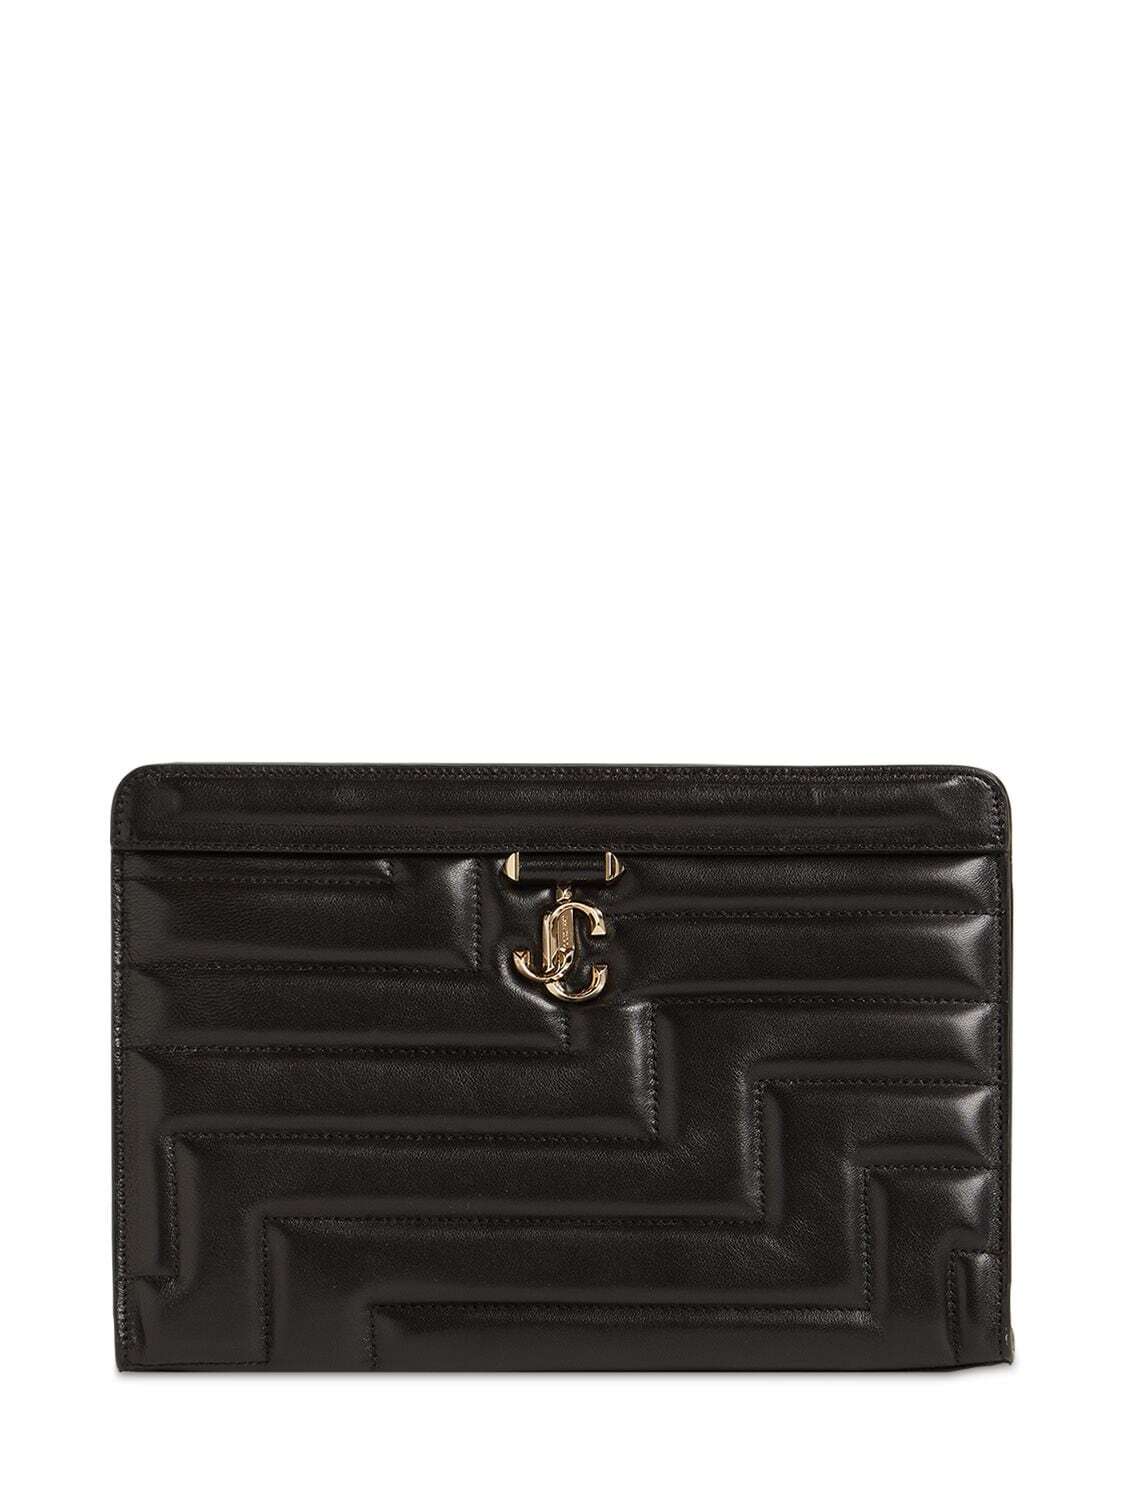 JIMMY CHOO Varenne Quilted Napa Leather Clutch in black